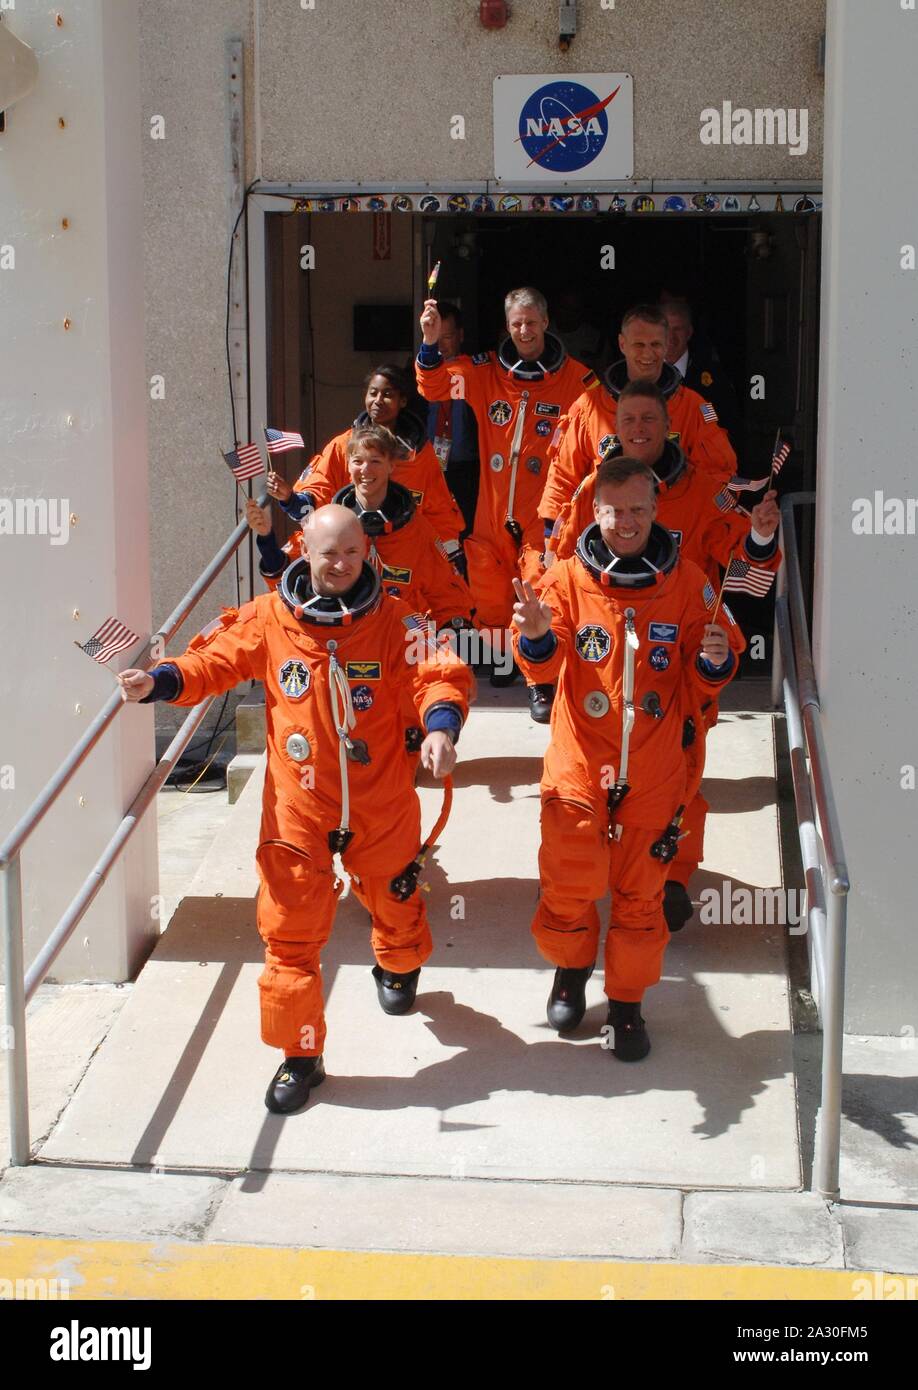 FILE: In this photo released by NASA, the STS-121 crew displays the spirit of the Fourth of July holiday with their flags and their eagerness to launch as they stride out of the Operations and Checkout Building at the Kennedy Space Center, Florida on July 4, 2006. Leading the way are Pilot Mark Kelly (left) and Commander Steven Lindsey (right). Behind them are Mission Specialists (second row) Lisa Nowak and Michael Fossum; (third row) Stephanie Wilson and Piers Sellers; and (at the rear) Thomas Reiter, who represents the European Space Agency. Mandatory Credit: Kim Shiflett - NASA via CNP | Stock Photo